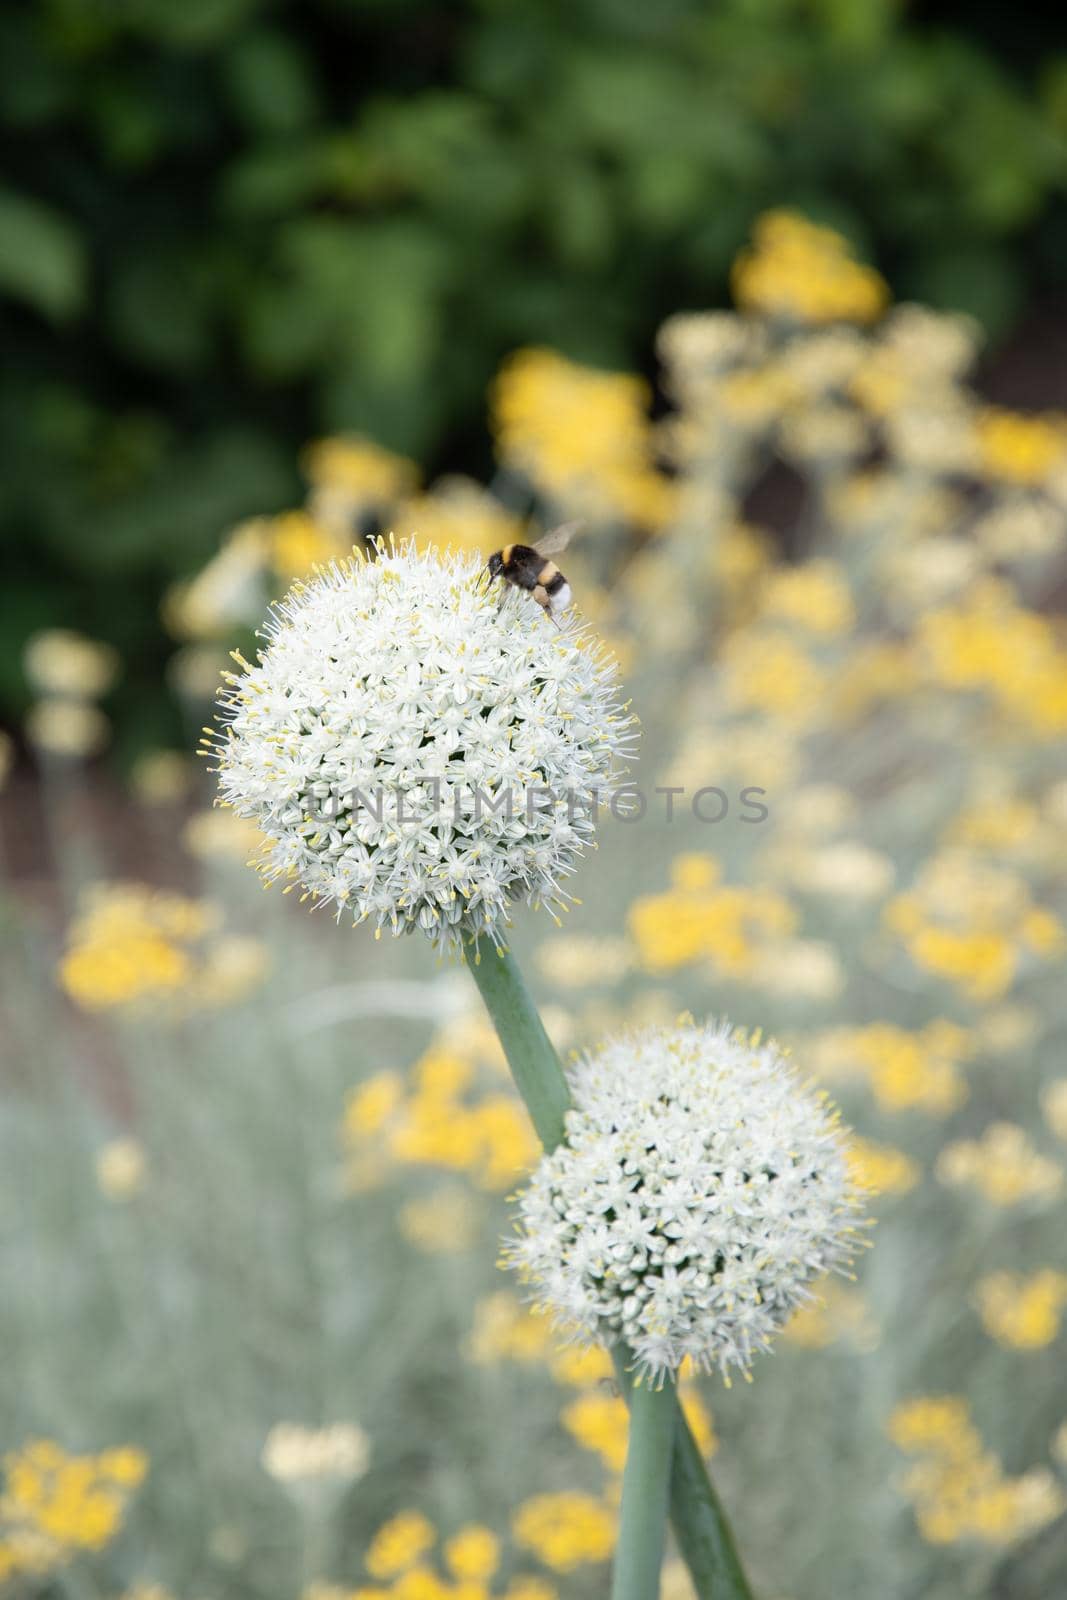 natural flower background, leek onion inflorescenc and blurred yellow flowers by KaterinaDalemans